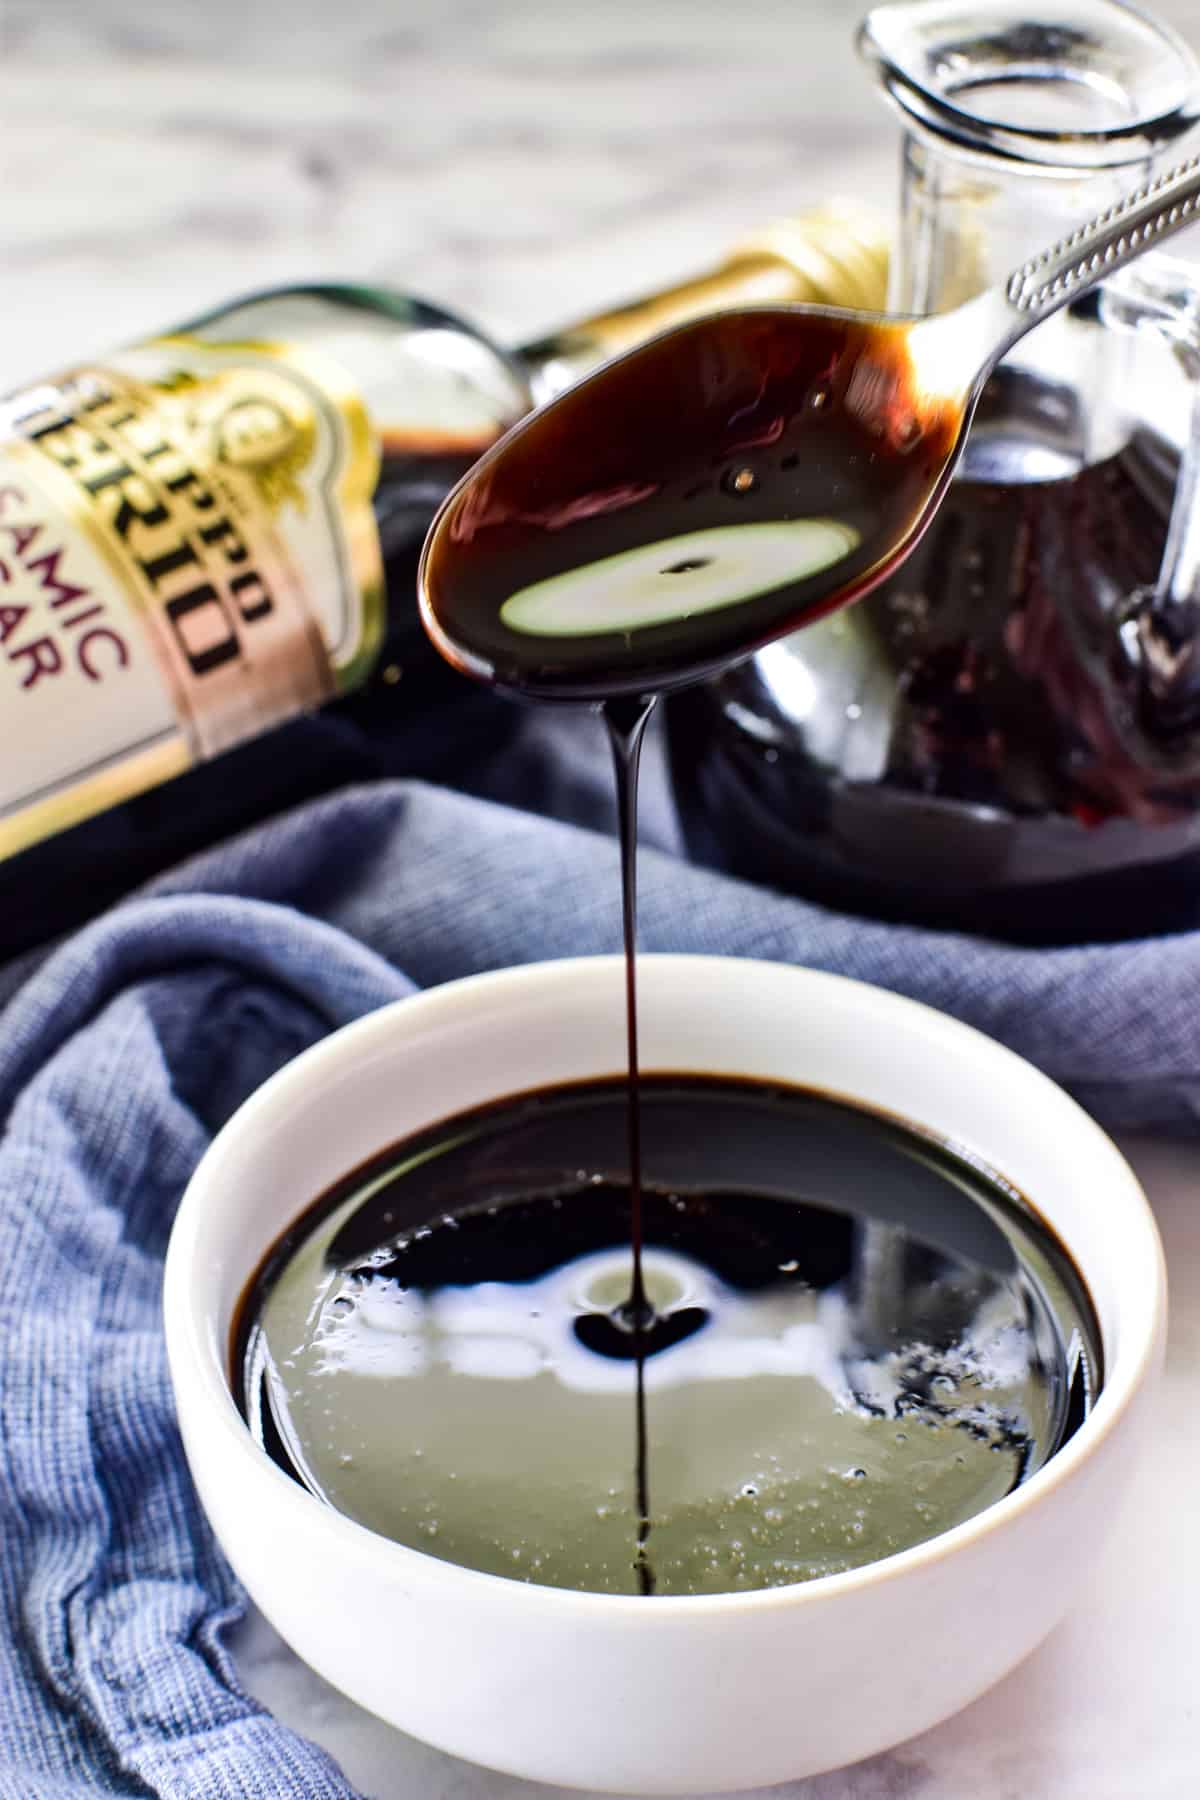 Spoon drizzling balsamic glaze into a small white bowl